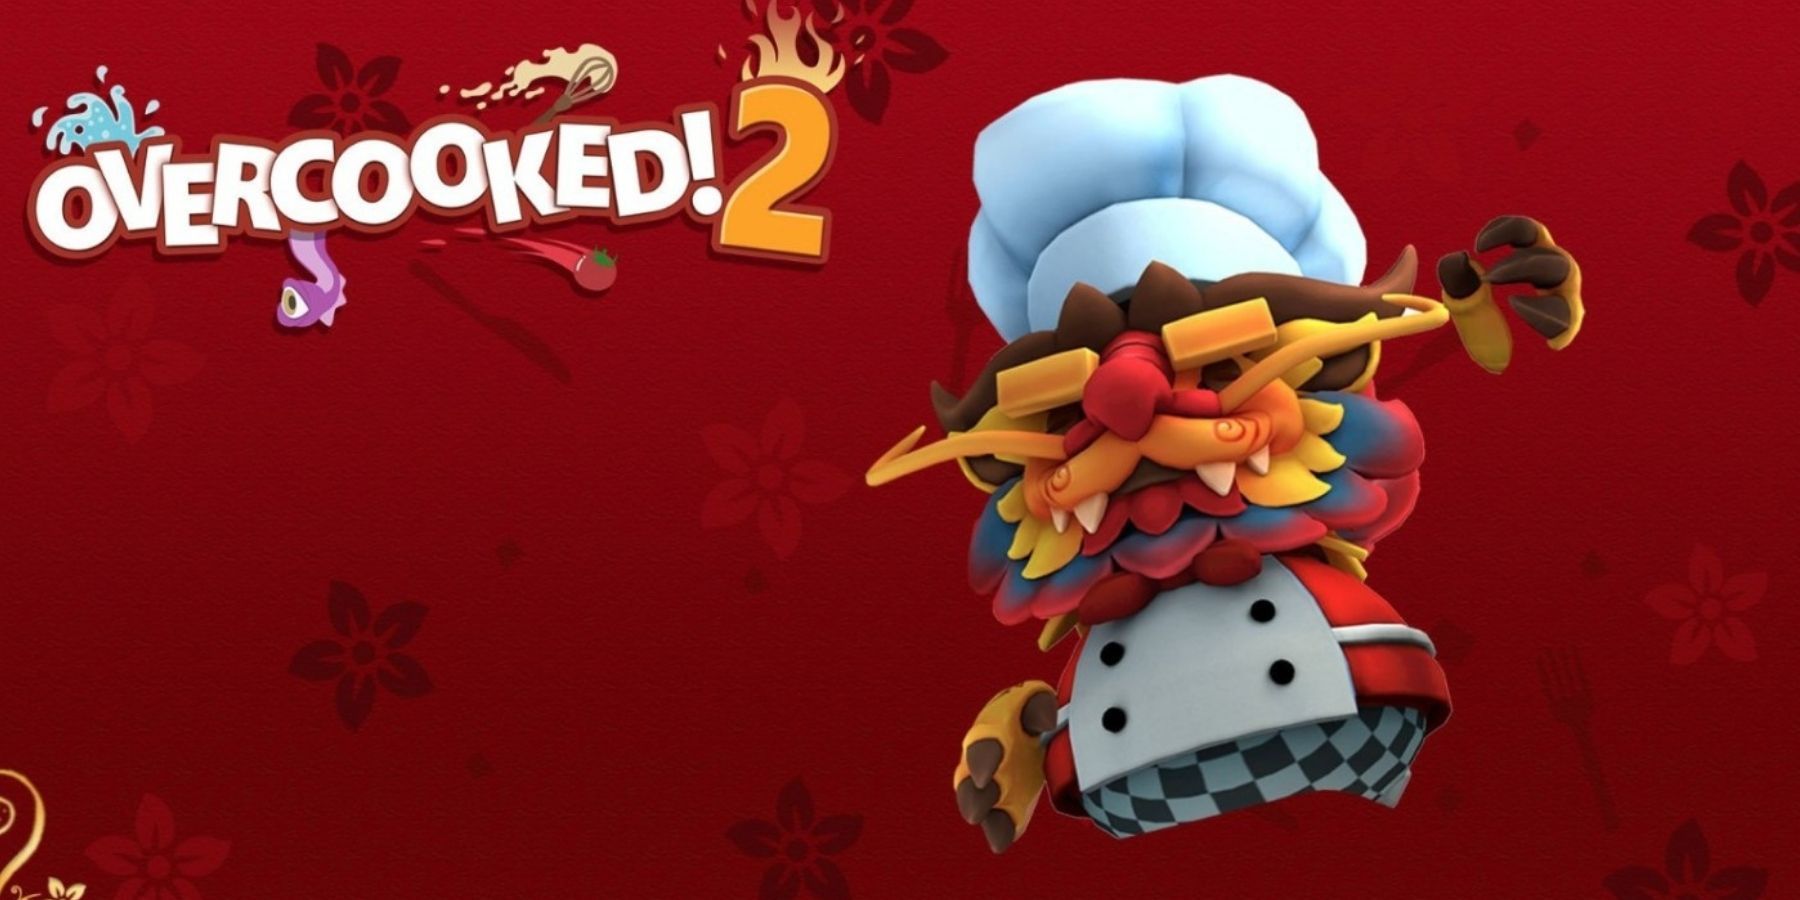 Overcooked! 2: The Most Adorable Fantastic Chefs